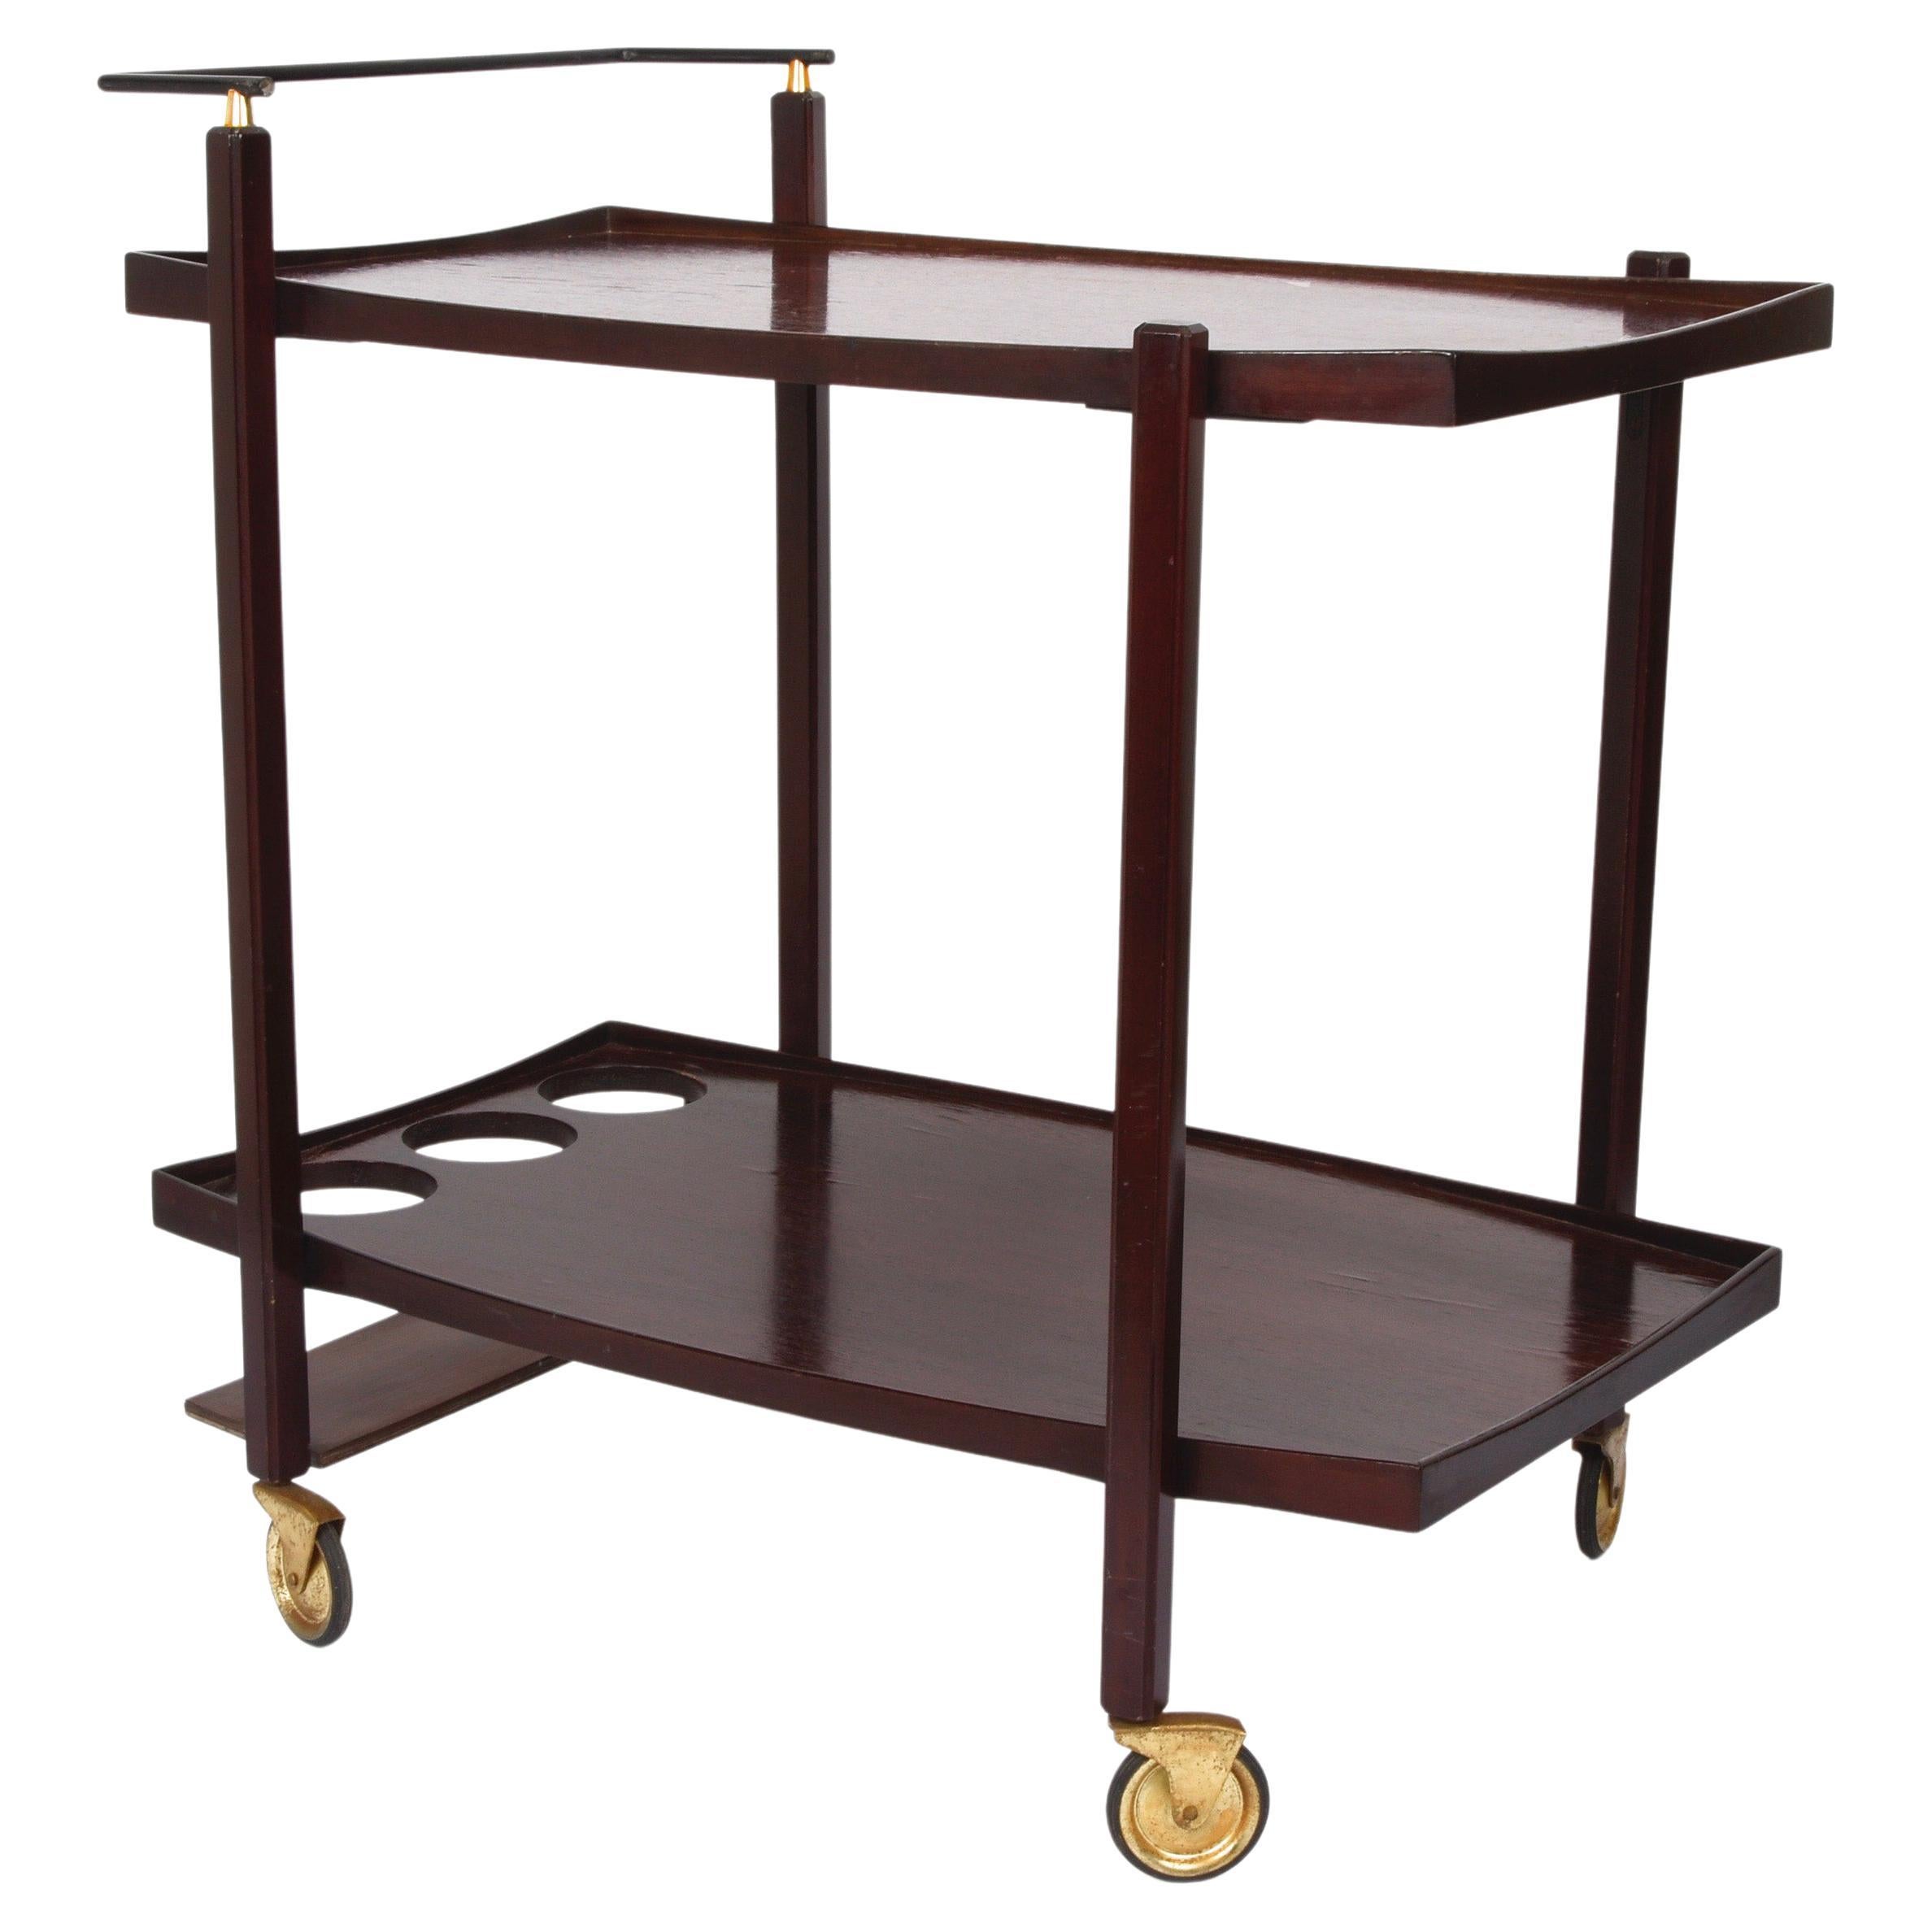 Amazing midcentury wood serving bar cart with enamelled metal bottle holder. This fantastic item was designed in Italy during the 1960s.

This modern mid-century serving cart is made of two dark brown teakwood floors, one of which has a bottle